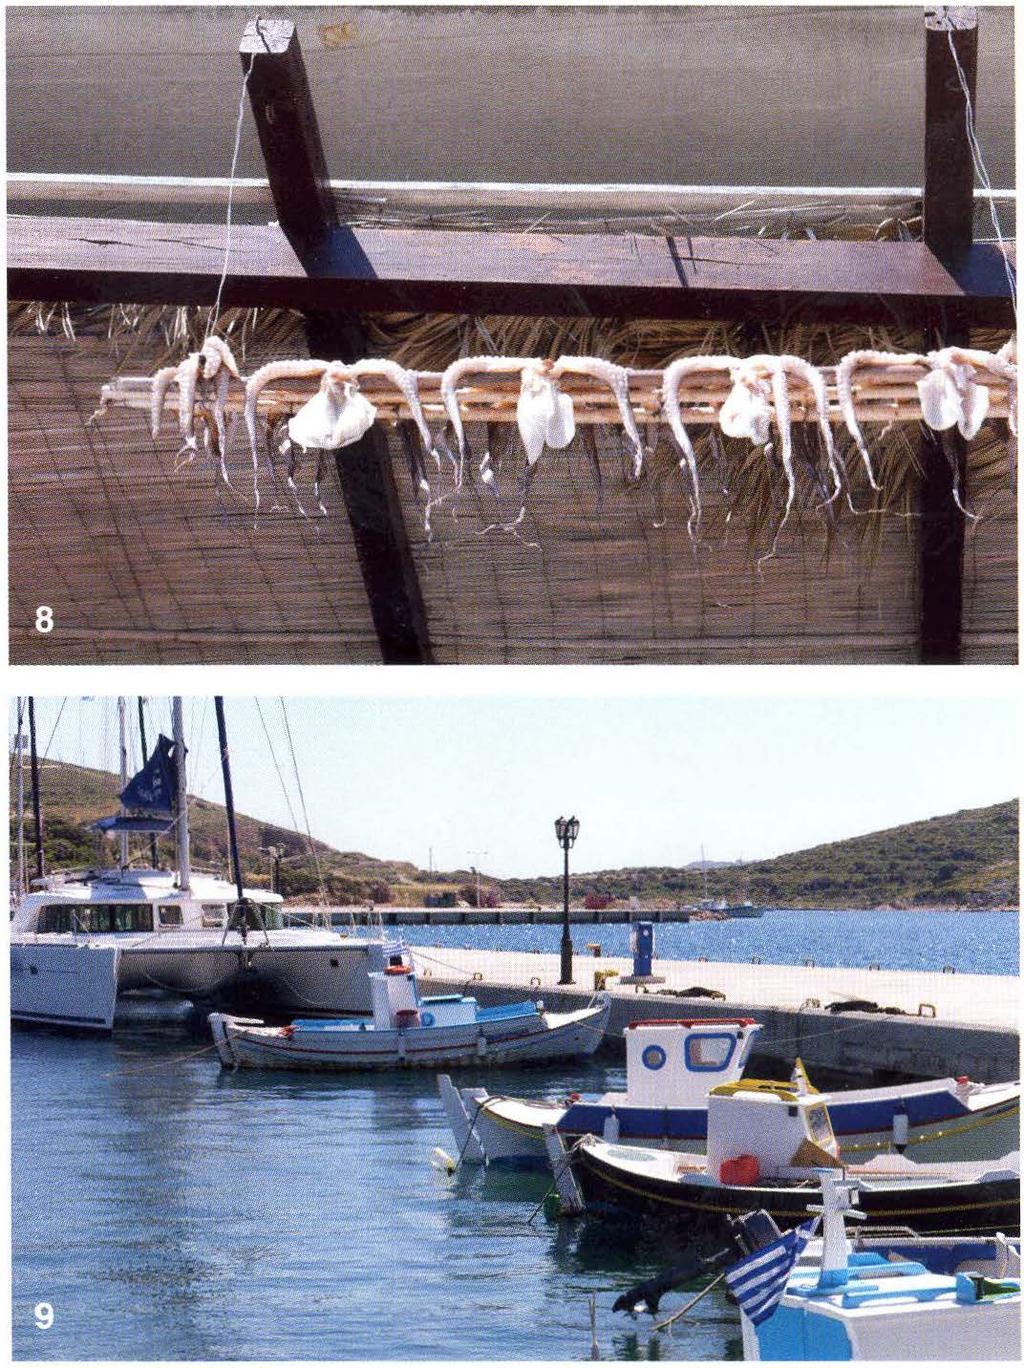 8 : Squid are not just in the water or on your plate; they are often put out to dry on the balconies... 9 : Amidst the small fishing boats, our cat appears huge.